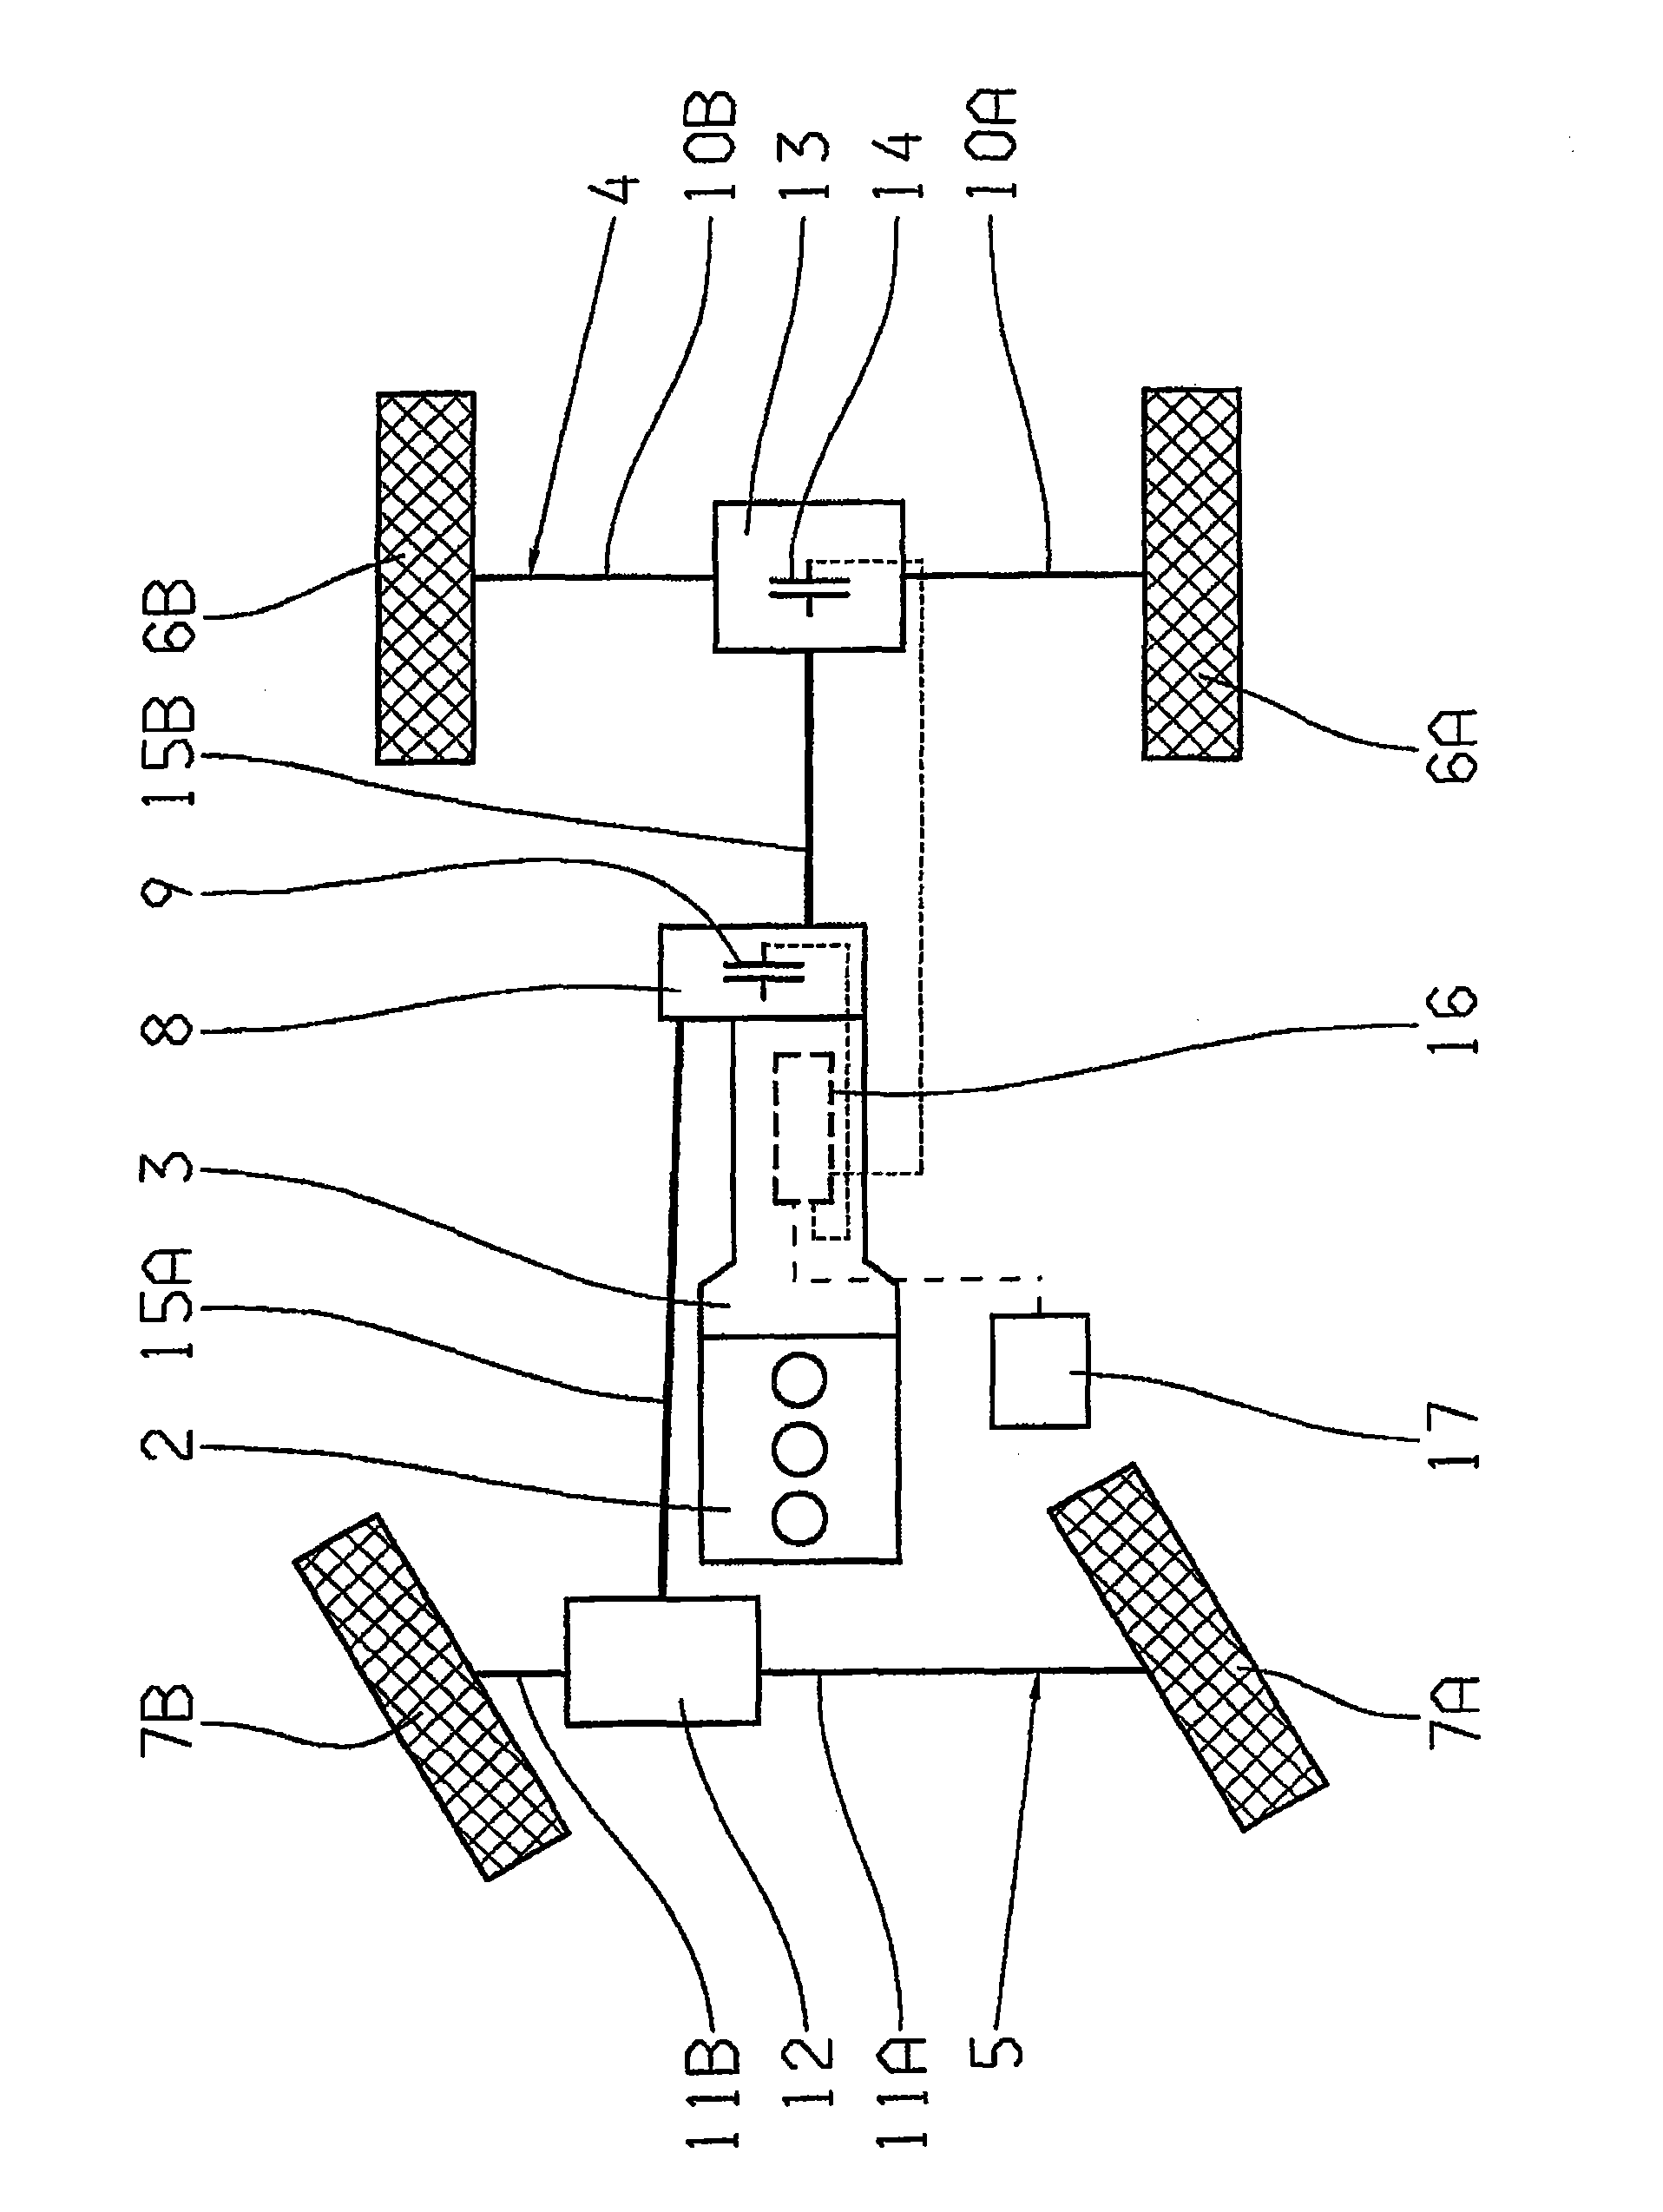 Determination method for actuation touch point pressure value of a friction shift element